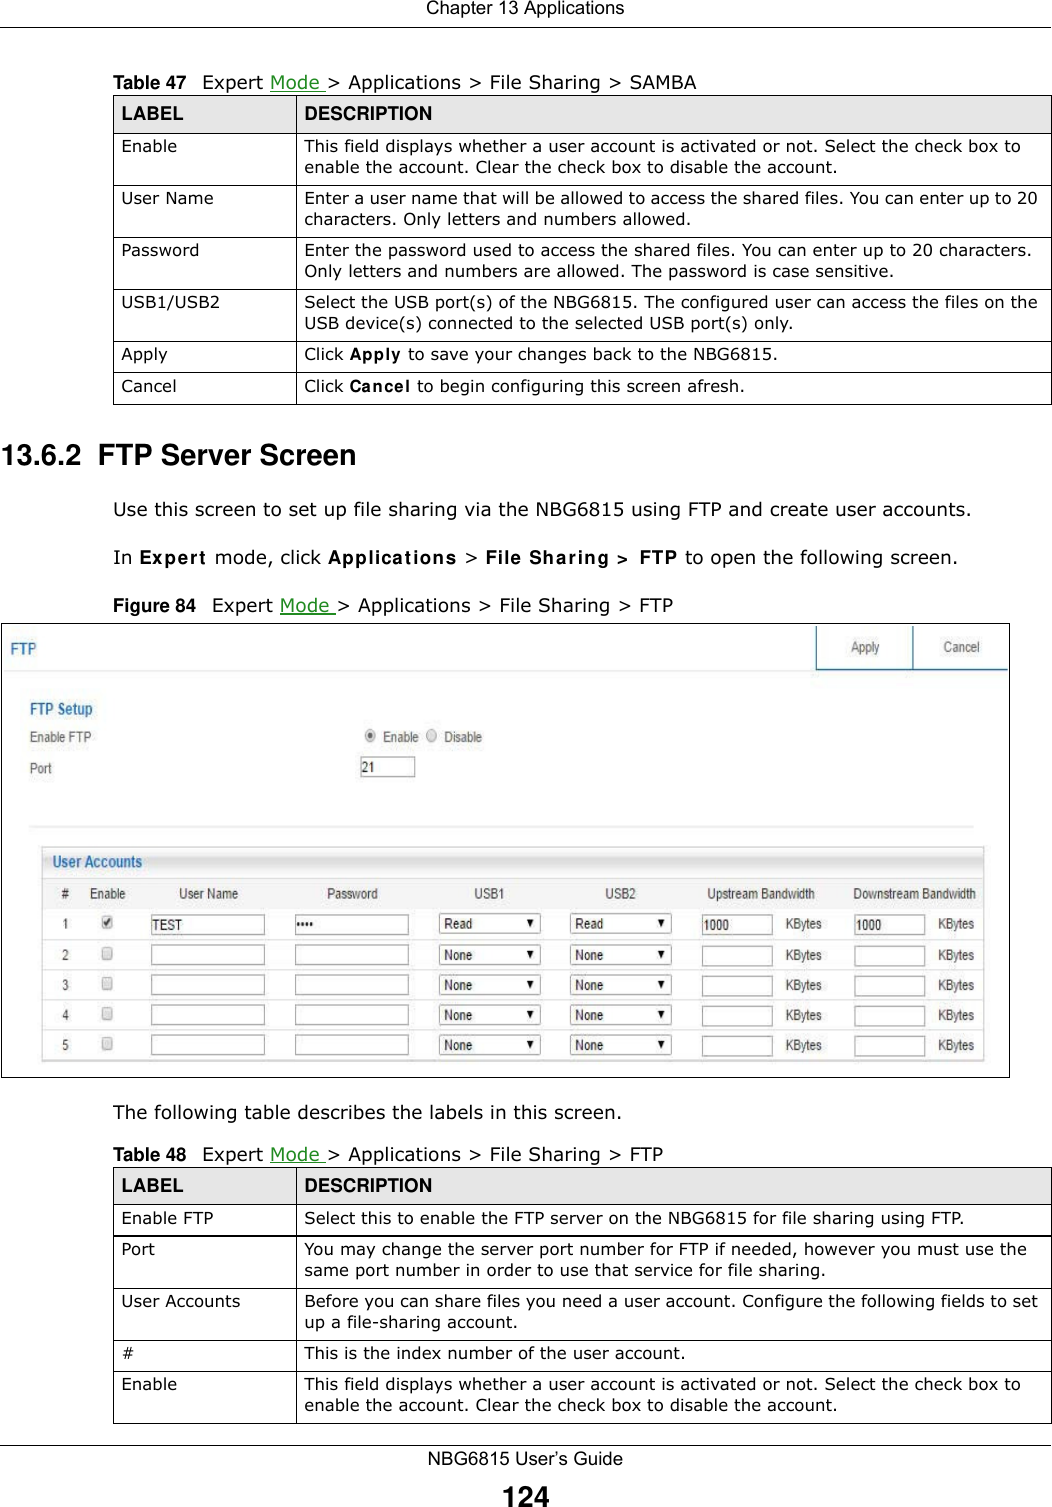 Chapter 13 ApplicationsNBG6815 User’s Guide12413.6.2  FTP Server ScreenUse this screen to set up file sharing via the NBG6815 using FTP and create user accounts. In Expert mode, click Applications &gt; File Sharing &gt; FTP to open the following screen.Figure 84   Expert Mode &gt; Applications &gt; File Sharing &gt; FTP  The following table describes the labels in this screen.Enable This field displays whether a user account is activated or not. Select the check box to enable the account. Clear the check box to disable the account.User Name Enter a user name that will be allowed to access the shared files. You can enter up to 20 characters. Only letters and numbers allowed.Password Enter the password used to access the shared files. You can enter up to 20 characters. Only letters and numbers are allowed. The password is case sensitive.USB1/USB2 Select the USB port(s) of the NBG6815. The configured user can access the files on the USB device(s) connected to the selected USB port(s) only.Apply Click Apply to save your changes back to the NBG6815.Cancel Click Cancel to begin configuring this screen afresh.Table 47   Expert Mode &gt; Applications &gt; File Sharing &gt; SAMBALABEL DESCRIPTIONTable 48   Expert Mode &gt; Applications &gt; File Sharing &gt; FTP LABEL DESCRIPTIONEnable FTP Select this to enable the FTP server on the NBG6815 for file sharing using FTP.Port You may change the server port number for FTP if needed, however you must use the same port number in order to use that service for file sharing.User Accounts Before you can share files you need a user account. Configure the following fields to set up a file-sharing account. #This is the index number of the user account.Enable This field displays whether a user account is activated or not. Select the check box to enable the account. Clear the check box to disable the account.